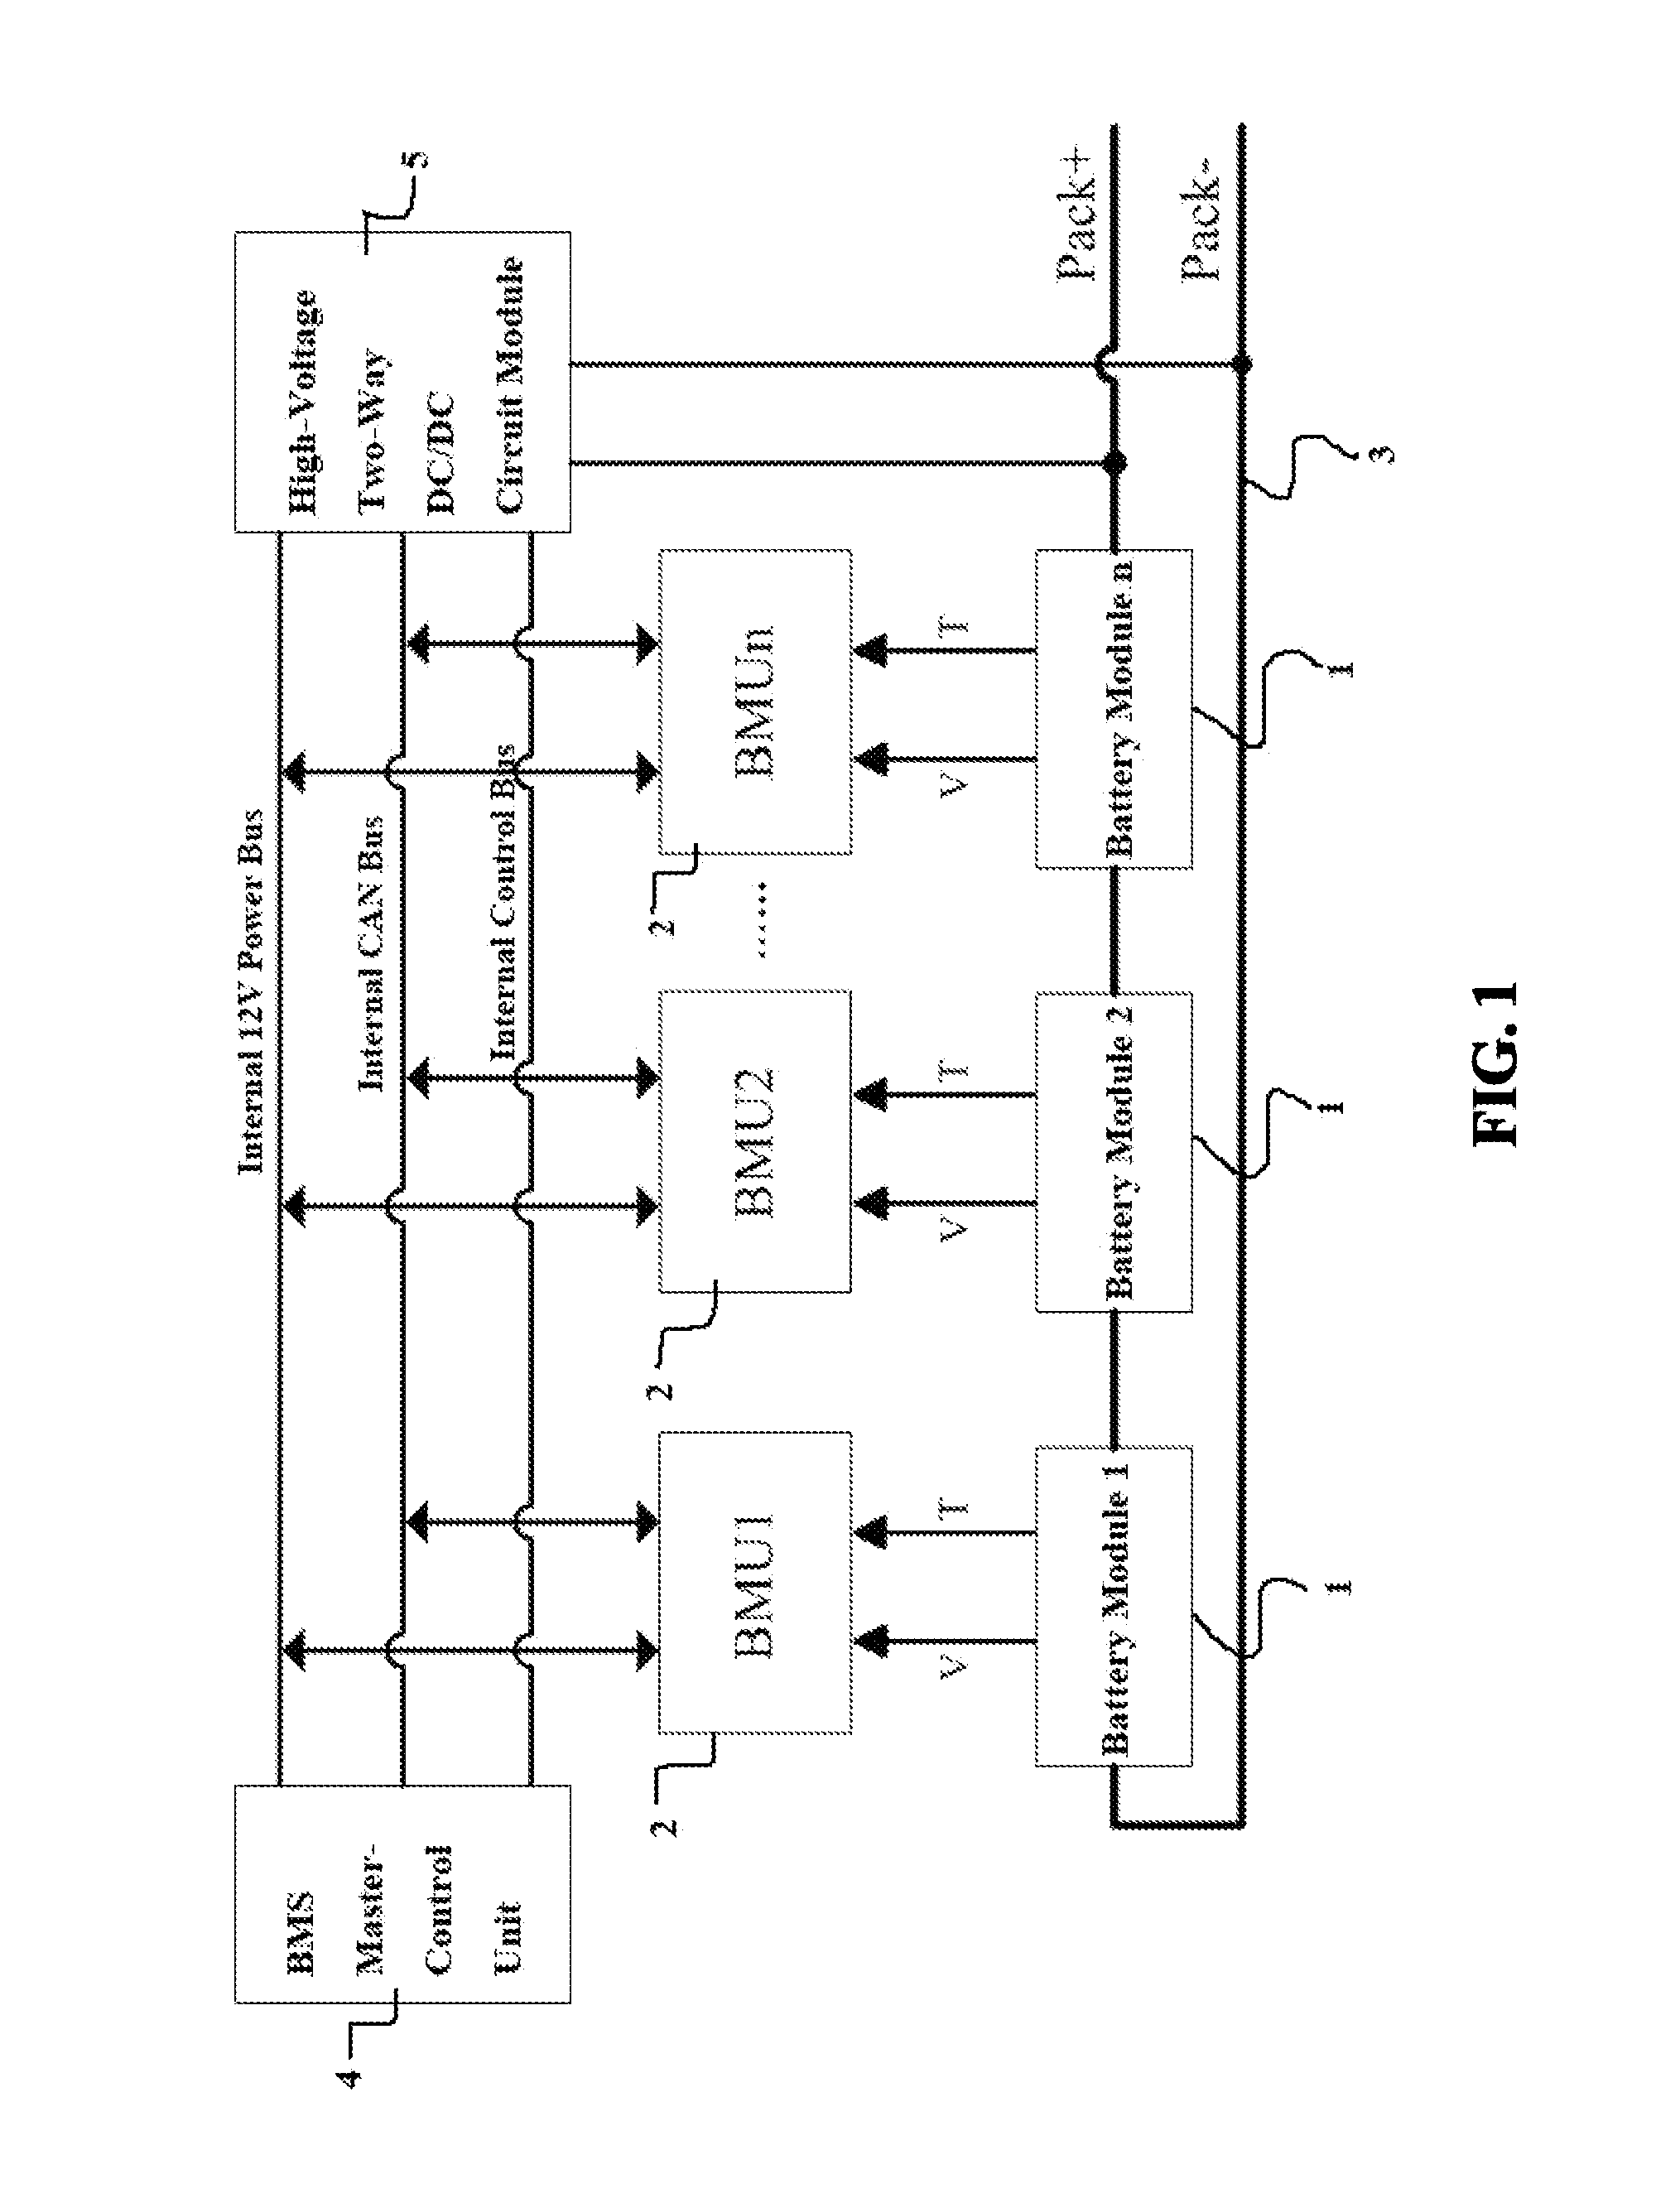 Balanced battery pack system based on two-way energy transfer